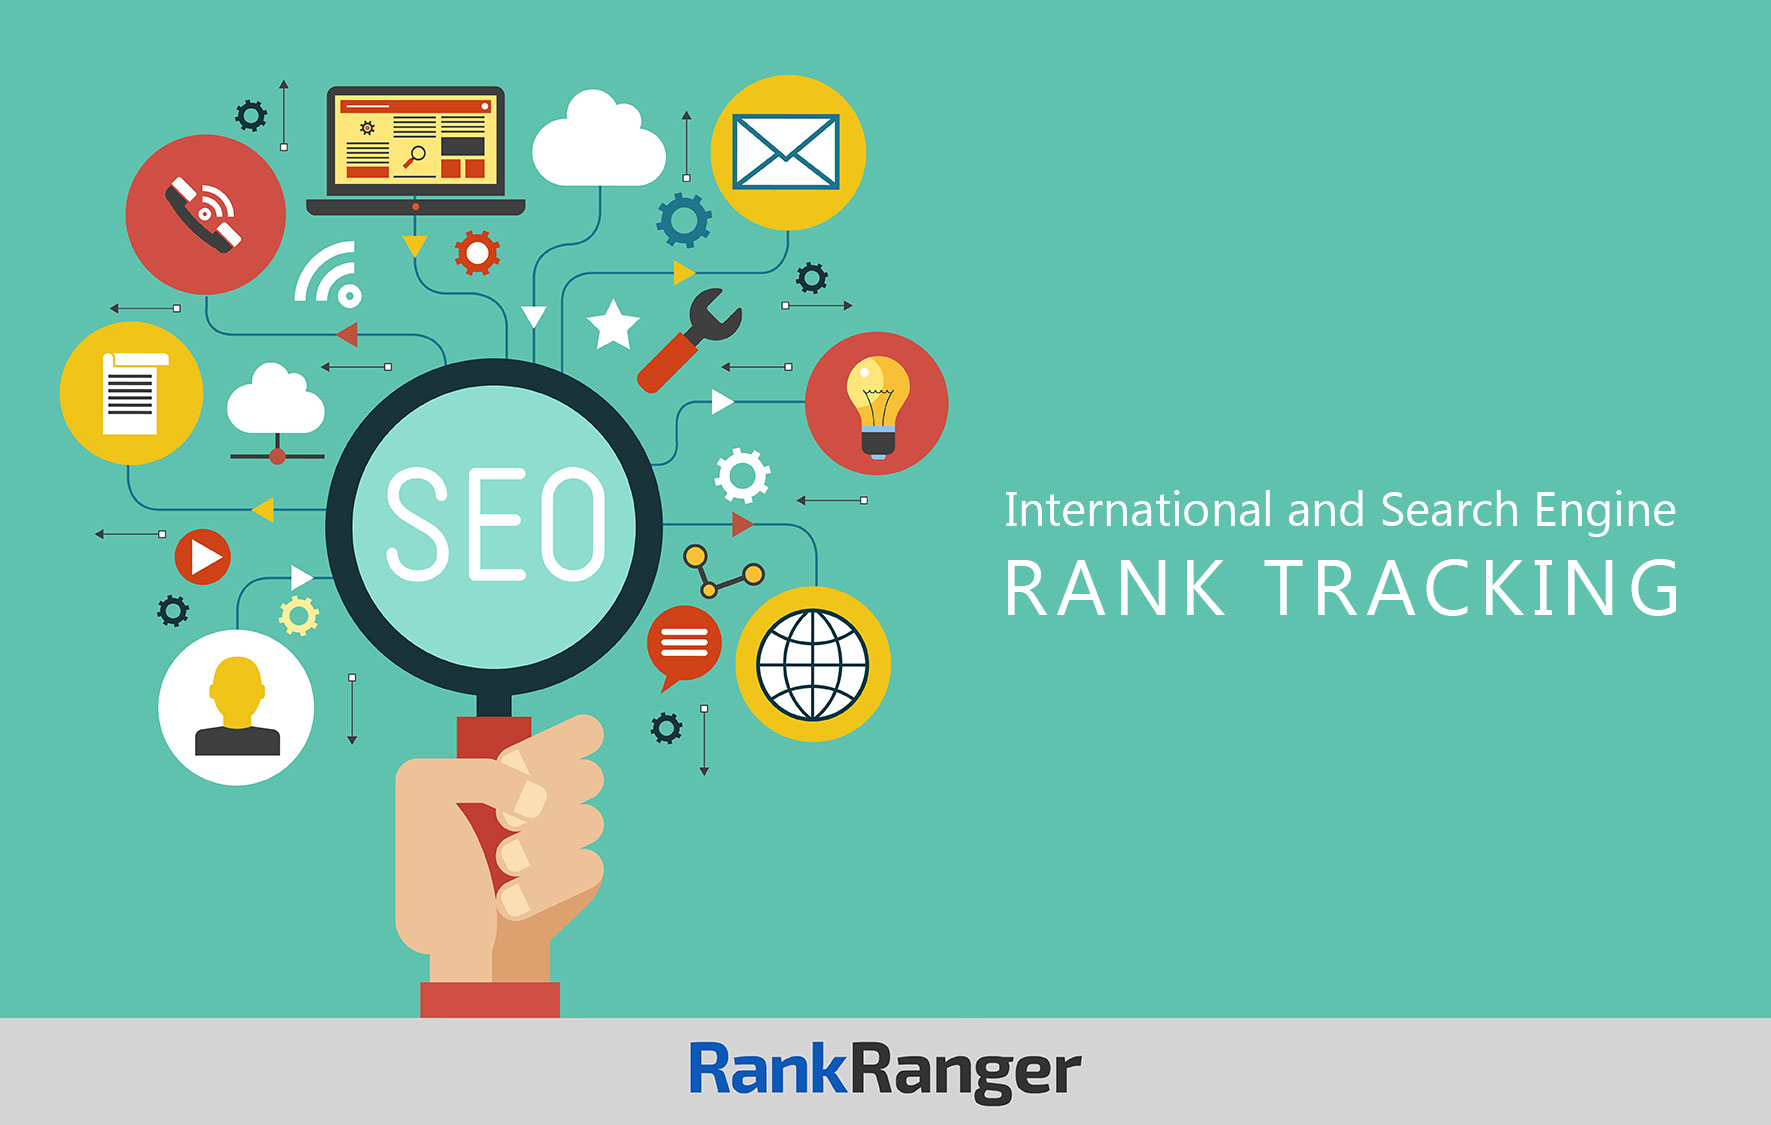 International and Search Engine Rank Tracking